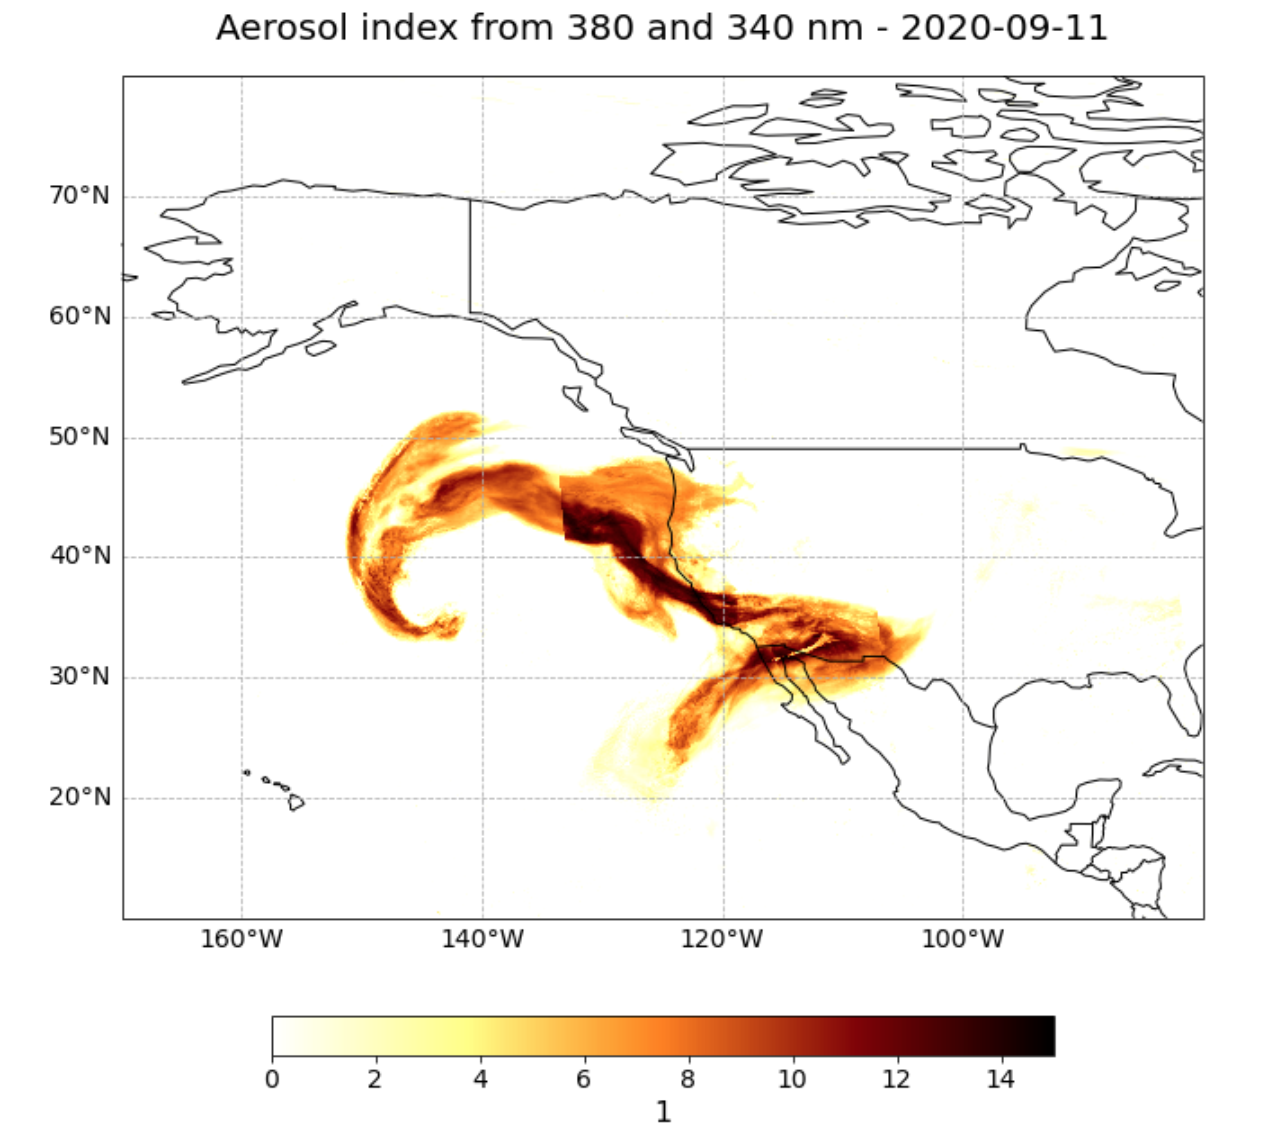 Figure 2. Ultraviolet Aerosol Index (UVAI) Level 2 product from Sentinel-5 TROPOMI over US west coast recorded on 11 September 2020.